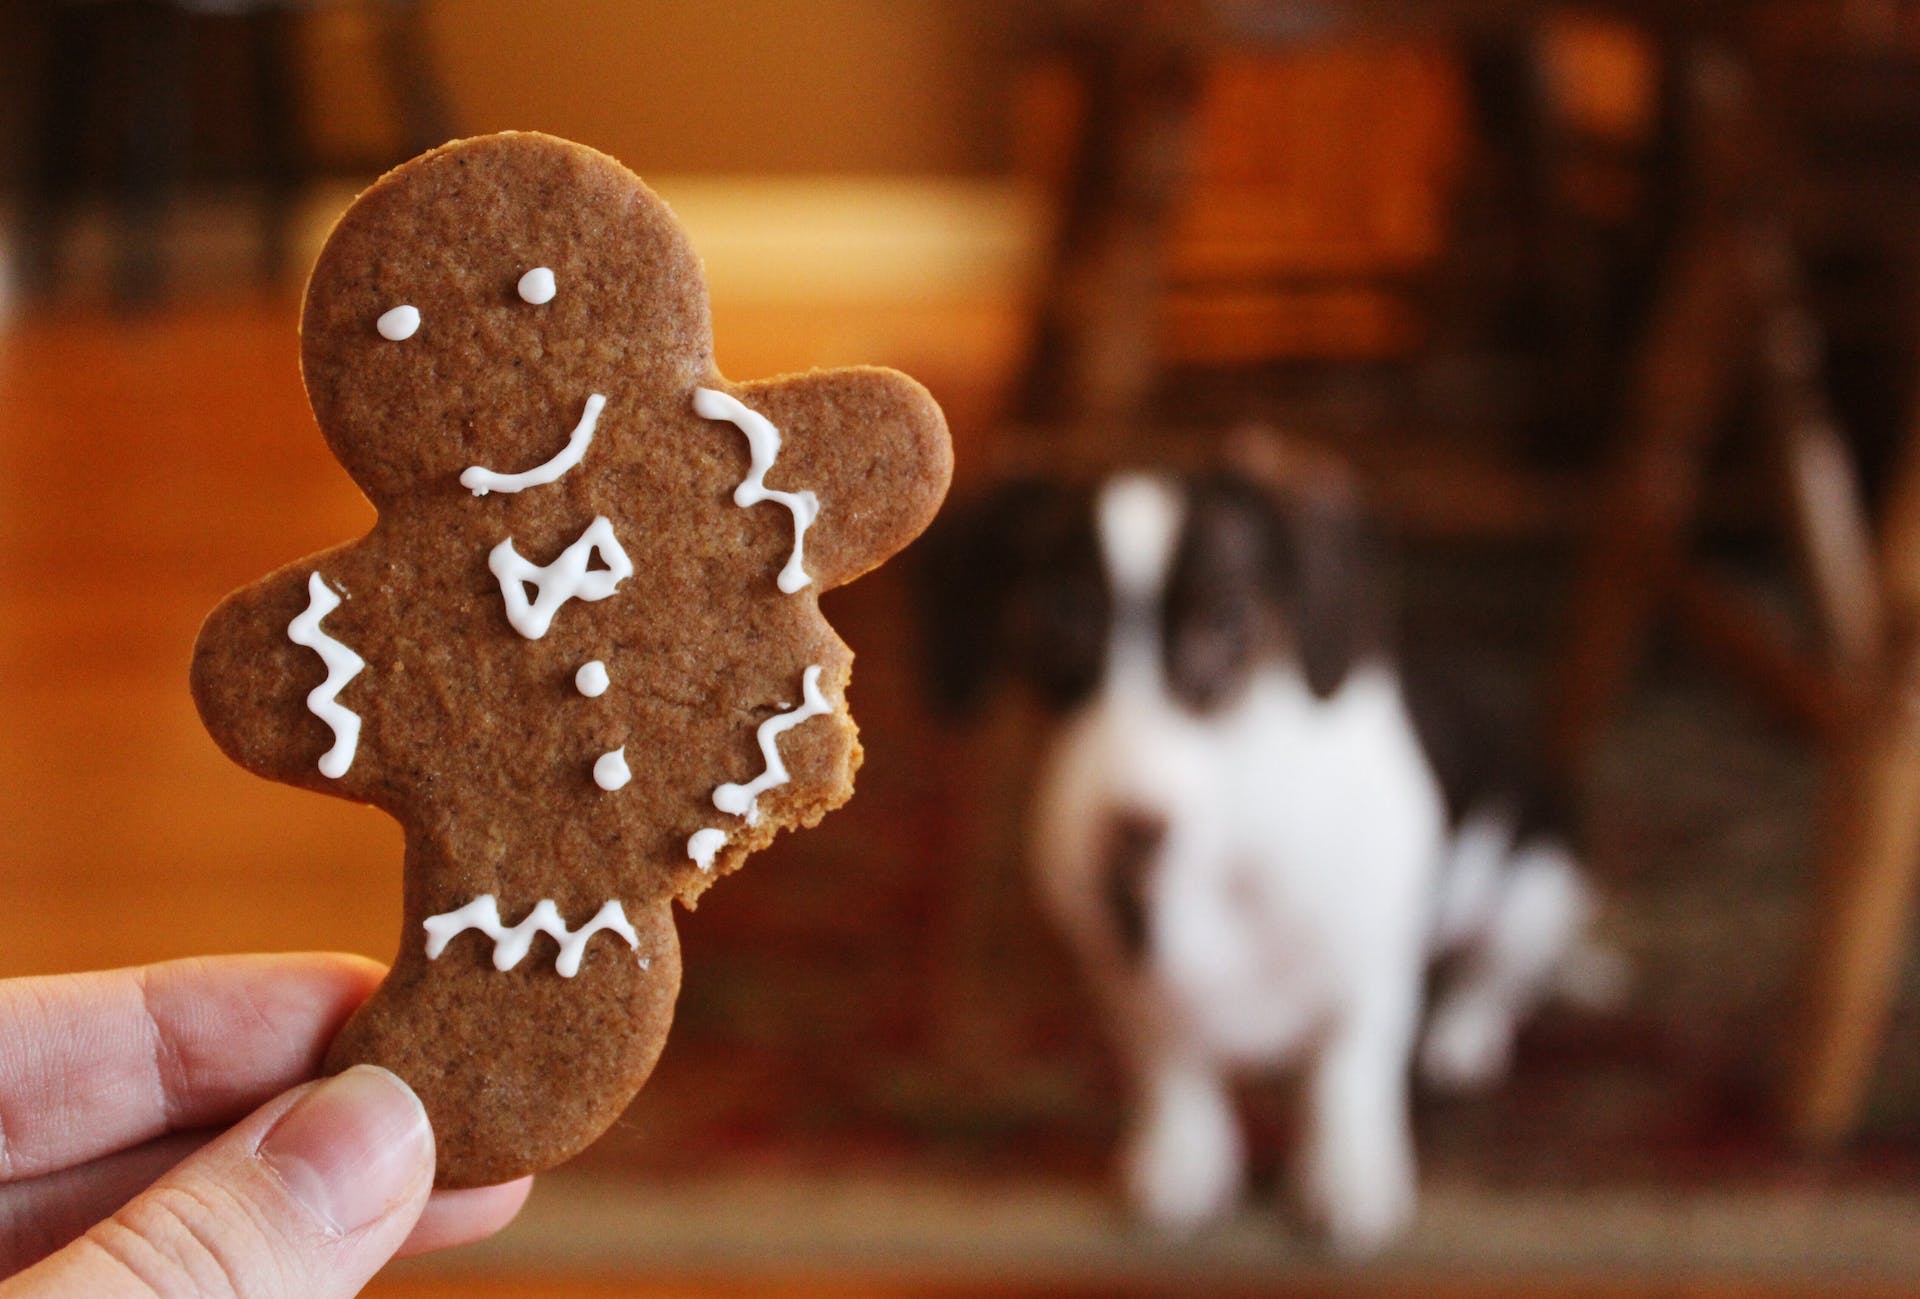 A person holding up a gingerbread cookie with a leg bitten off, dog in the background